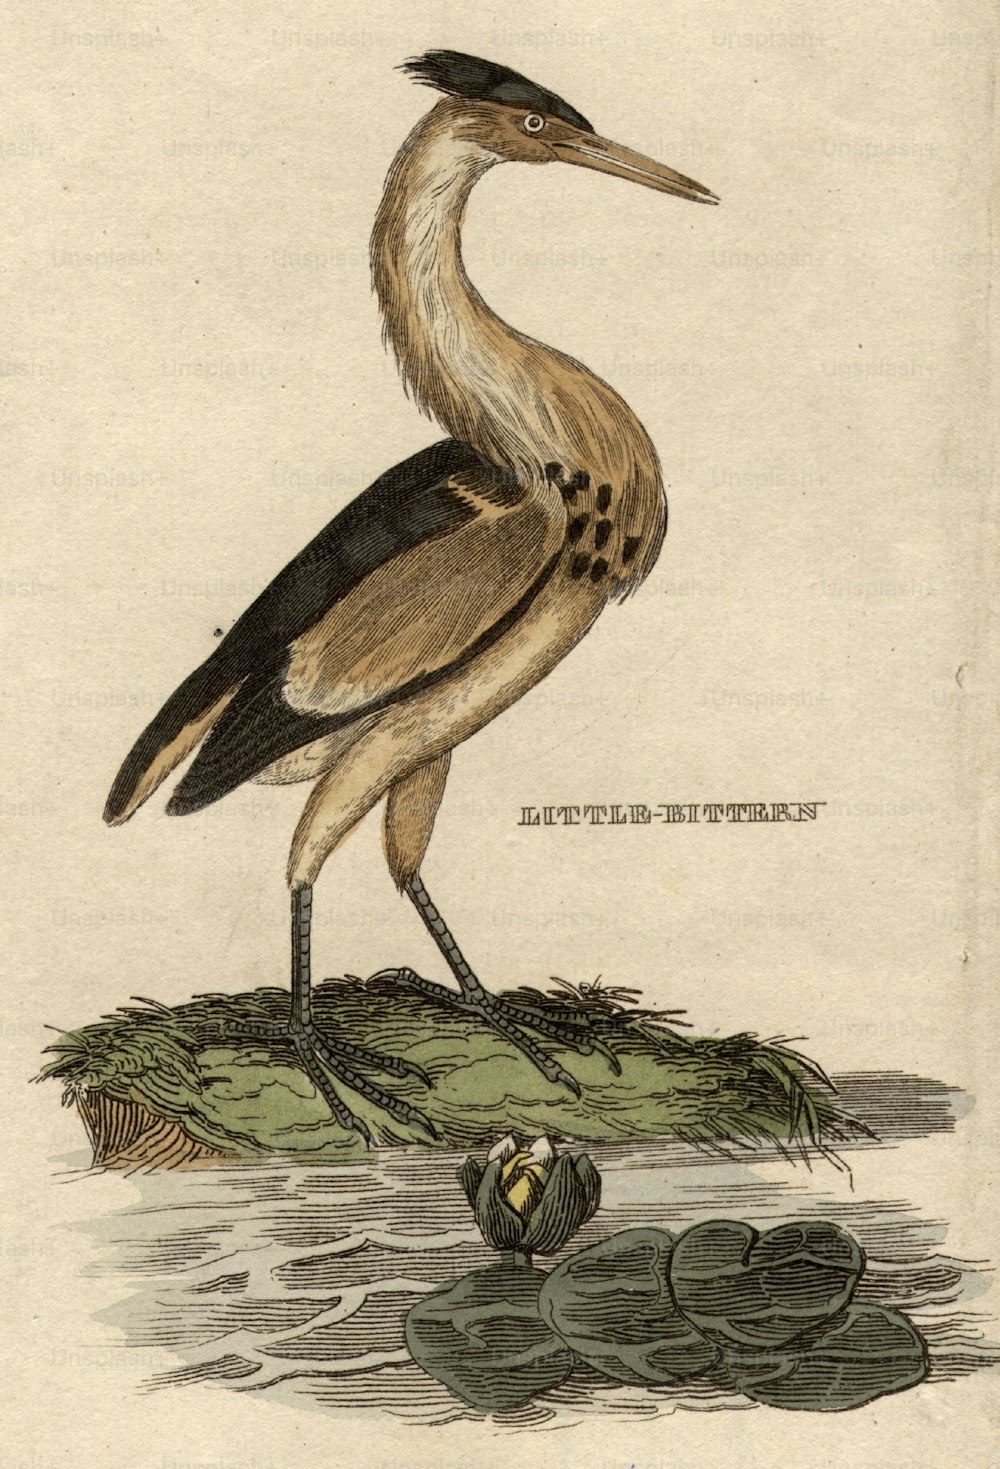 circa 1800:  The Little Bittern, a marsh bird of the heron family.  (Photo by Hulton Archive/Getty Images)